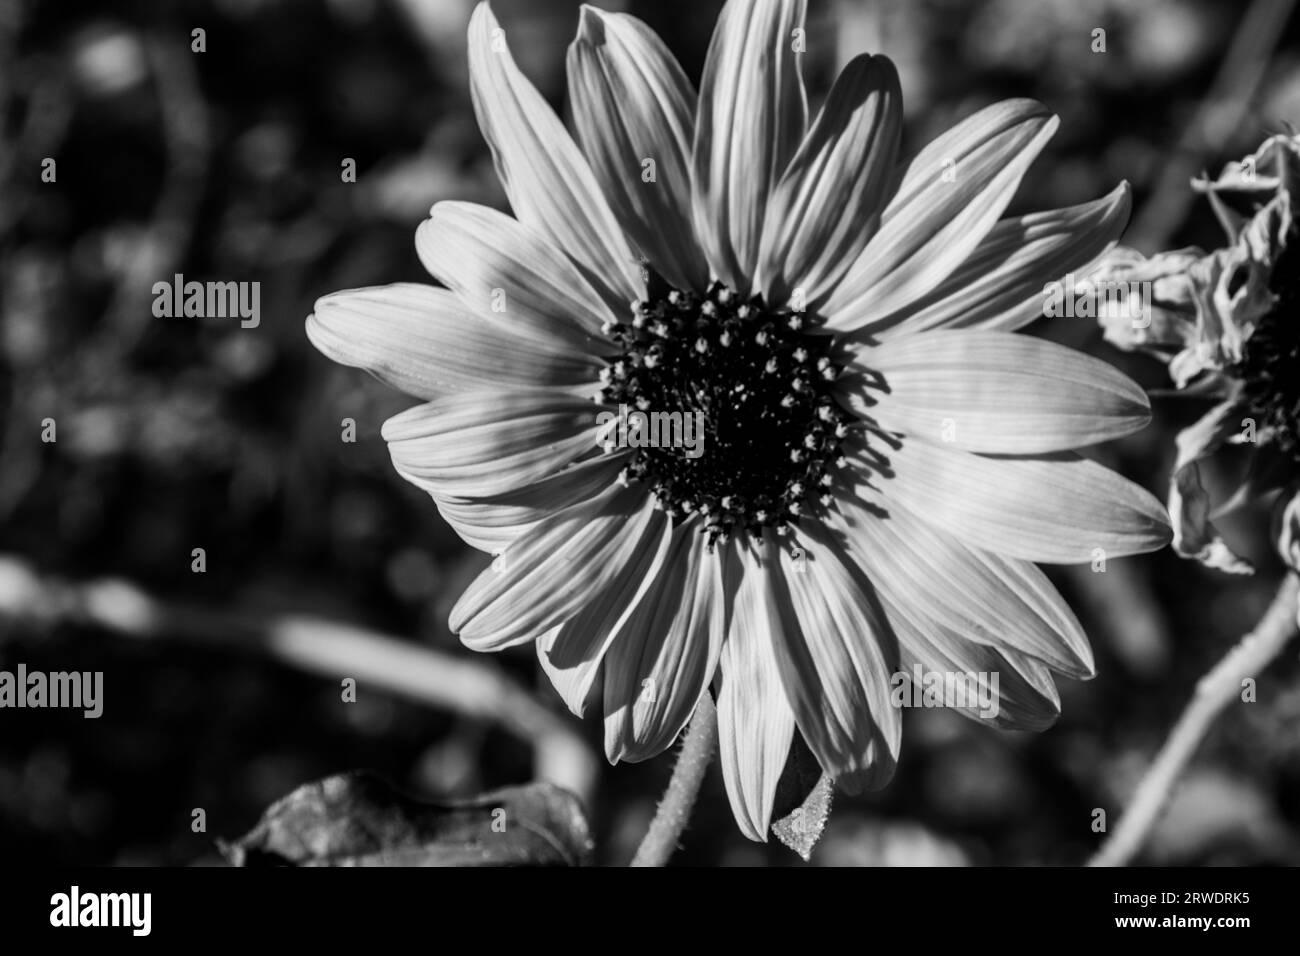 Closeup on a dwarf sunflower in bloom, with a black and white filter. Stock Photo